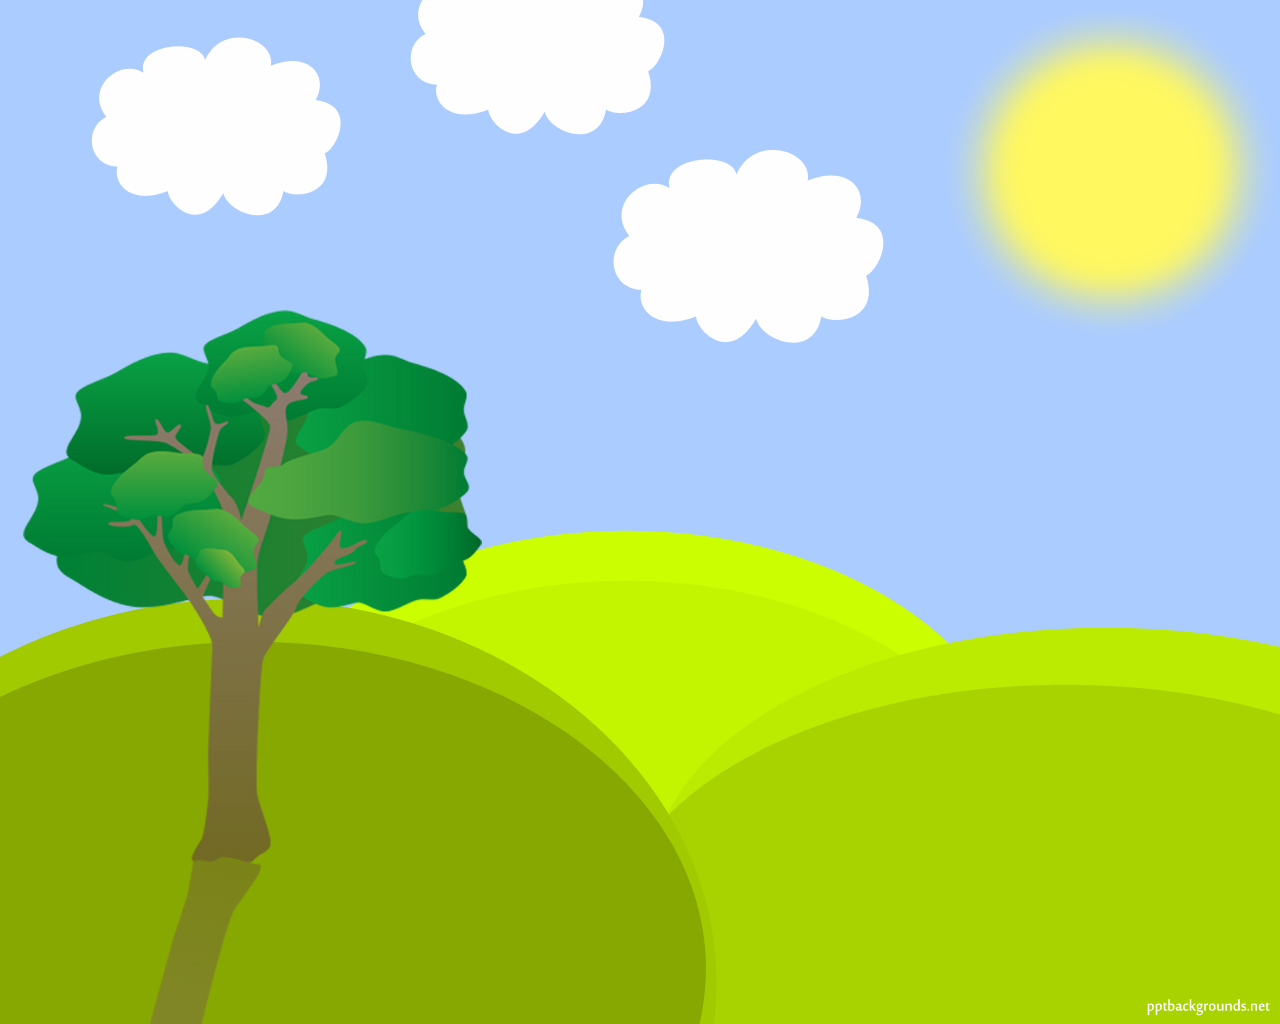 Free Spring Landscape Vector Backgrounds For PowerPoint 